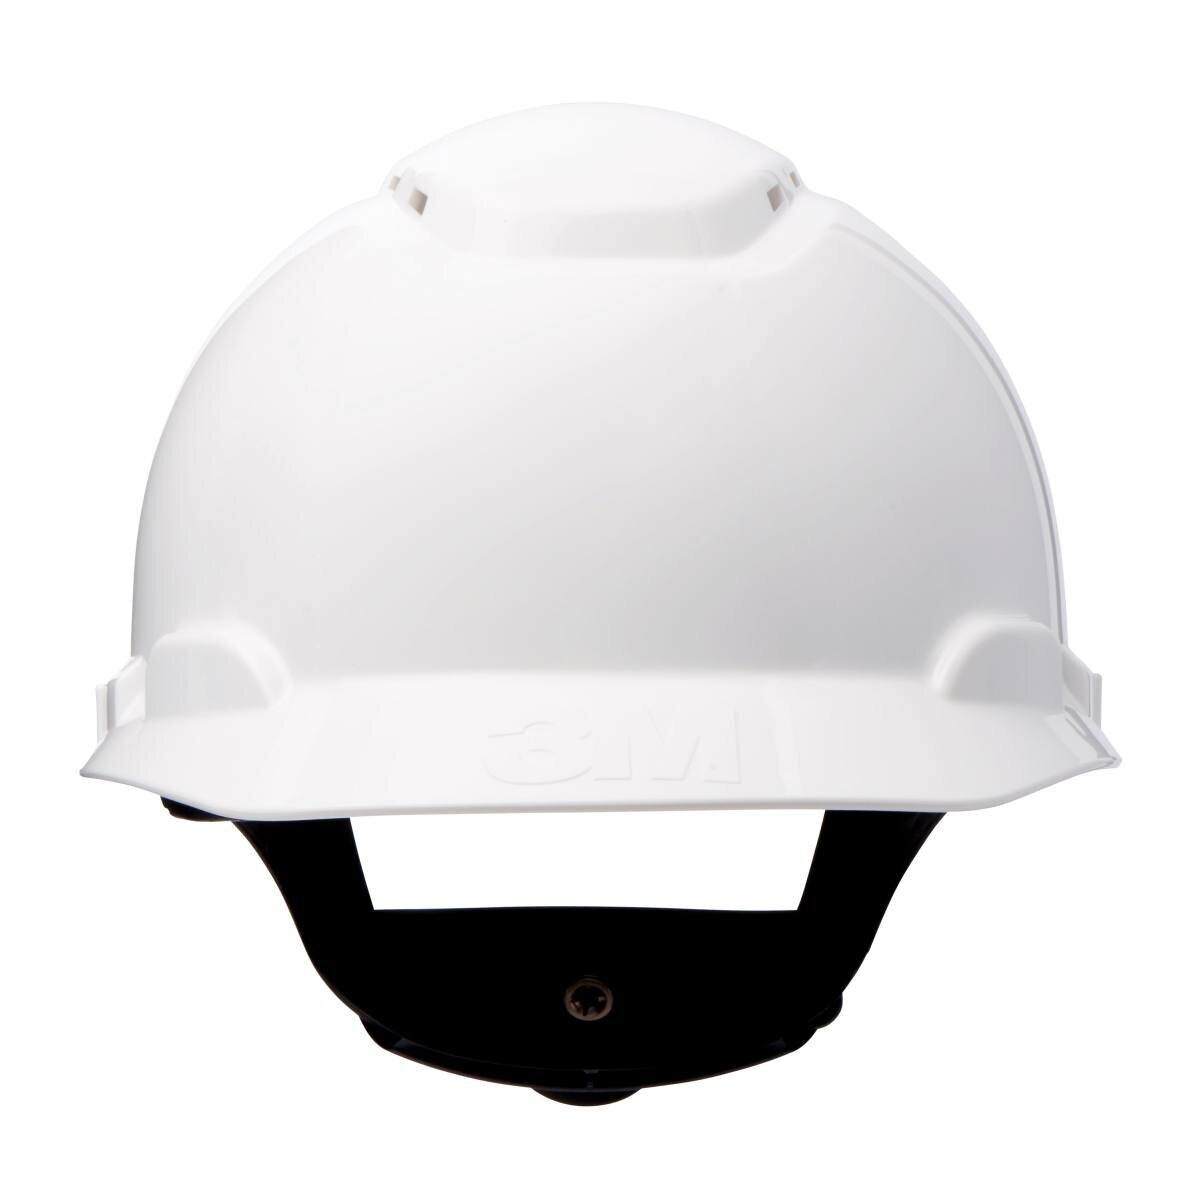 3M safety helmet H700 series H700NVW in white, with ratchet and plastic welding strap